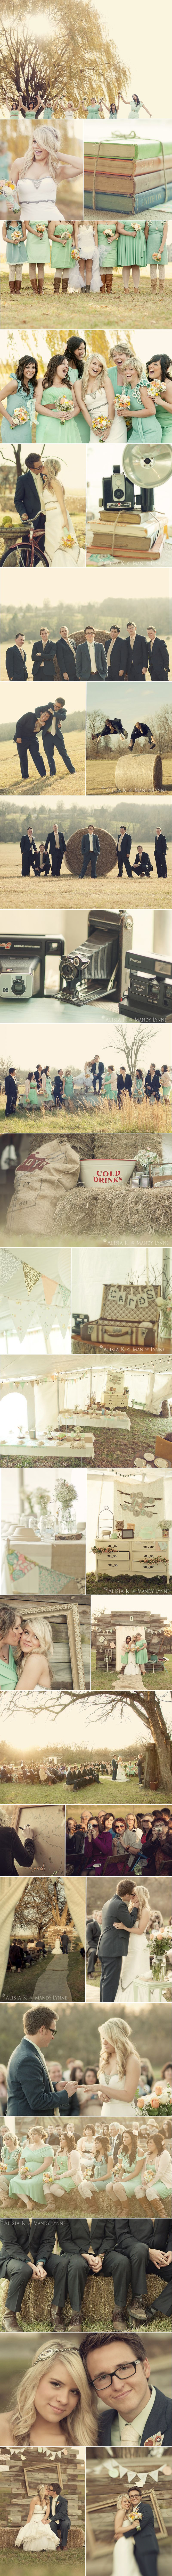 country casual wedding